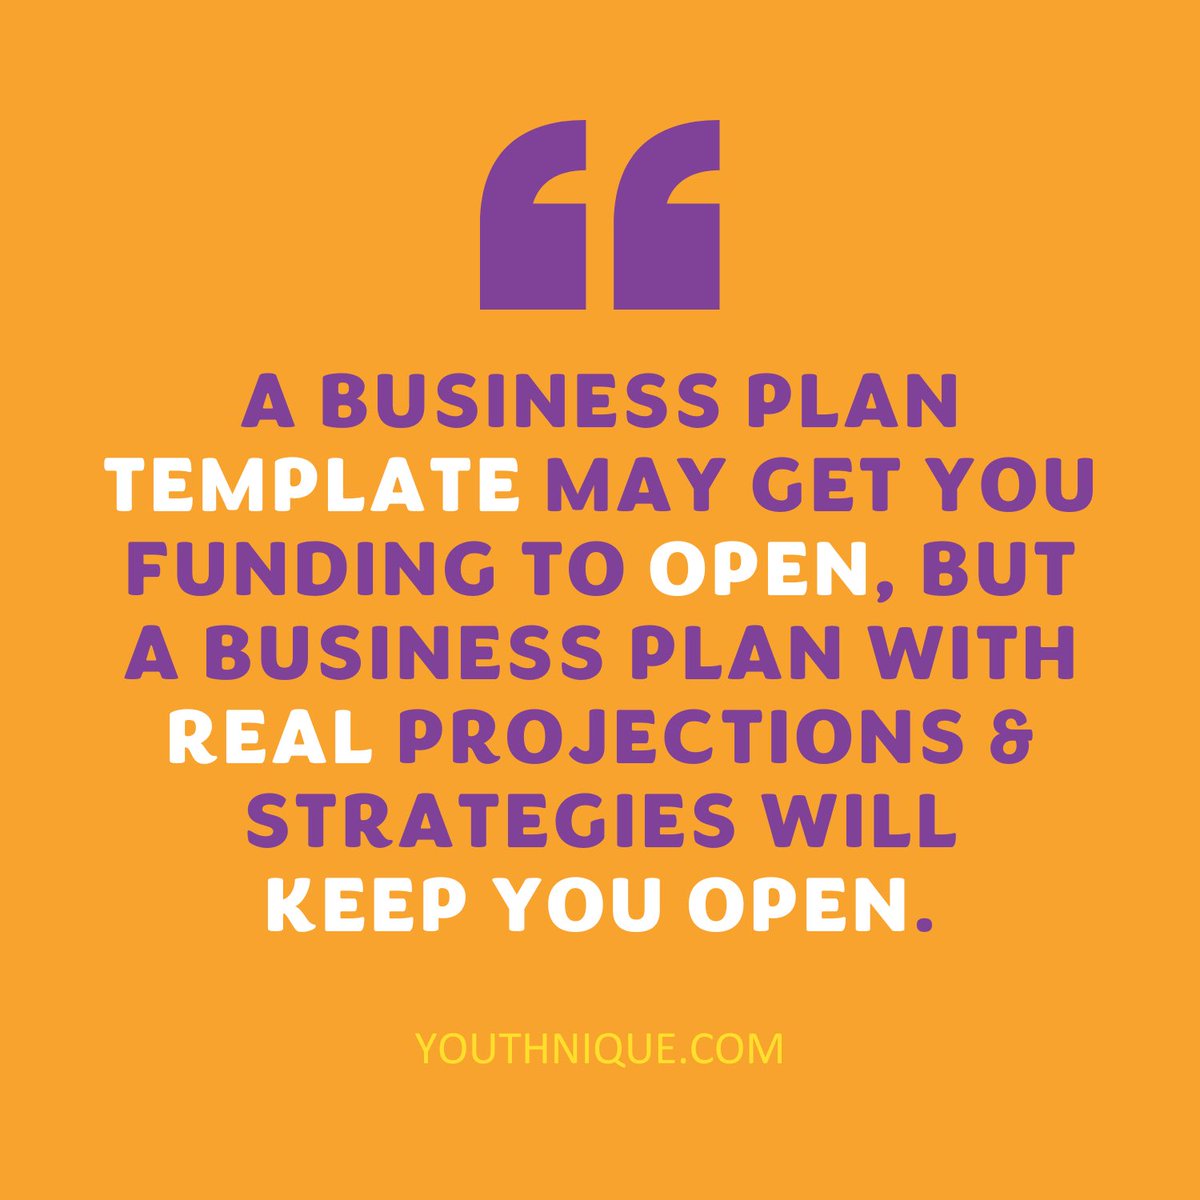 A business plan template is just a guide, you must research your target market, prices, etc. Need help writing your business plan? Schedule a Free Consultation bookedin.com/book/youthniqu… #SmallBusiness #businessplanning #Funding #Entrepreneurship #targetmarket